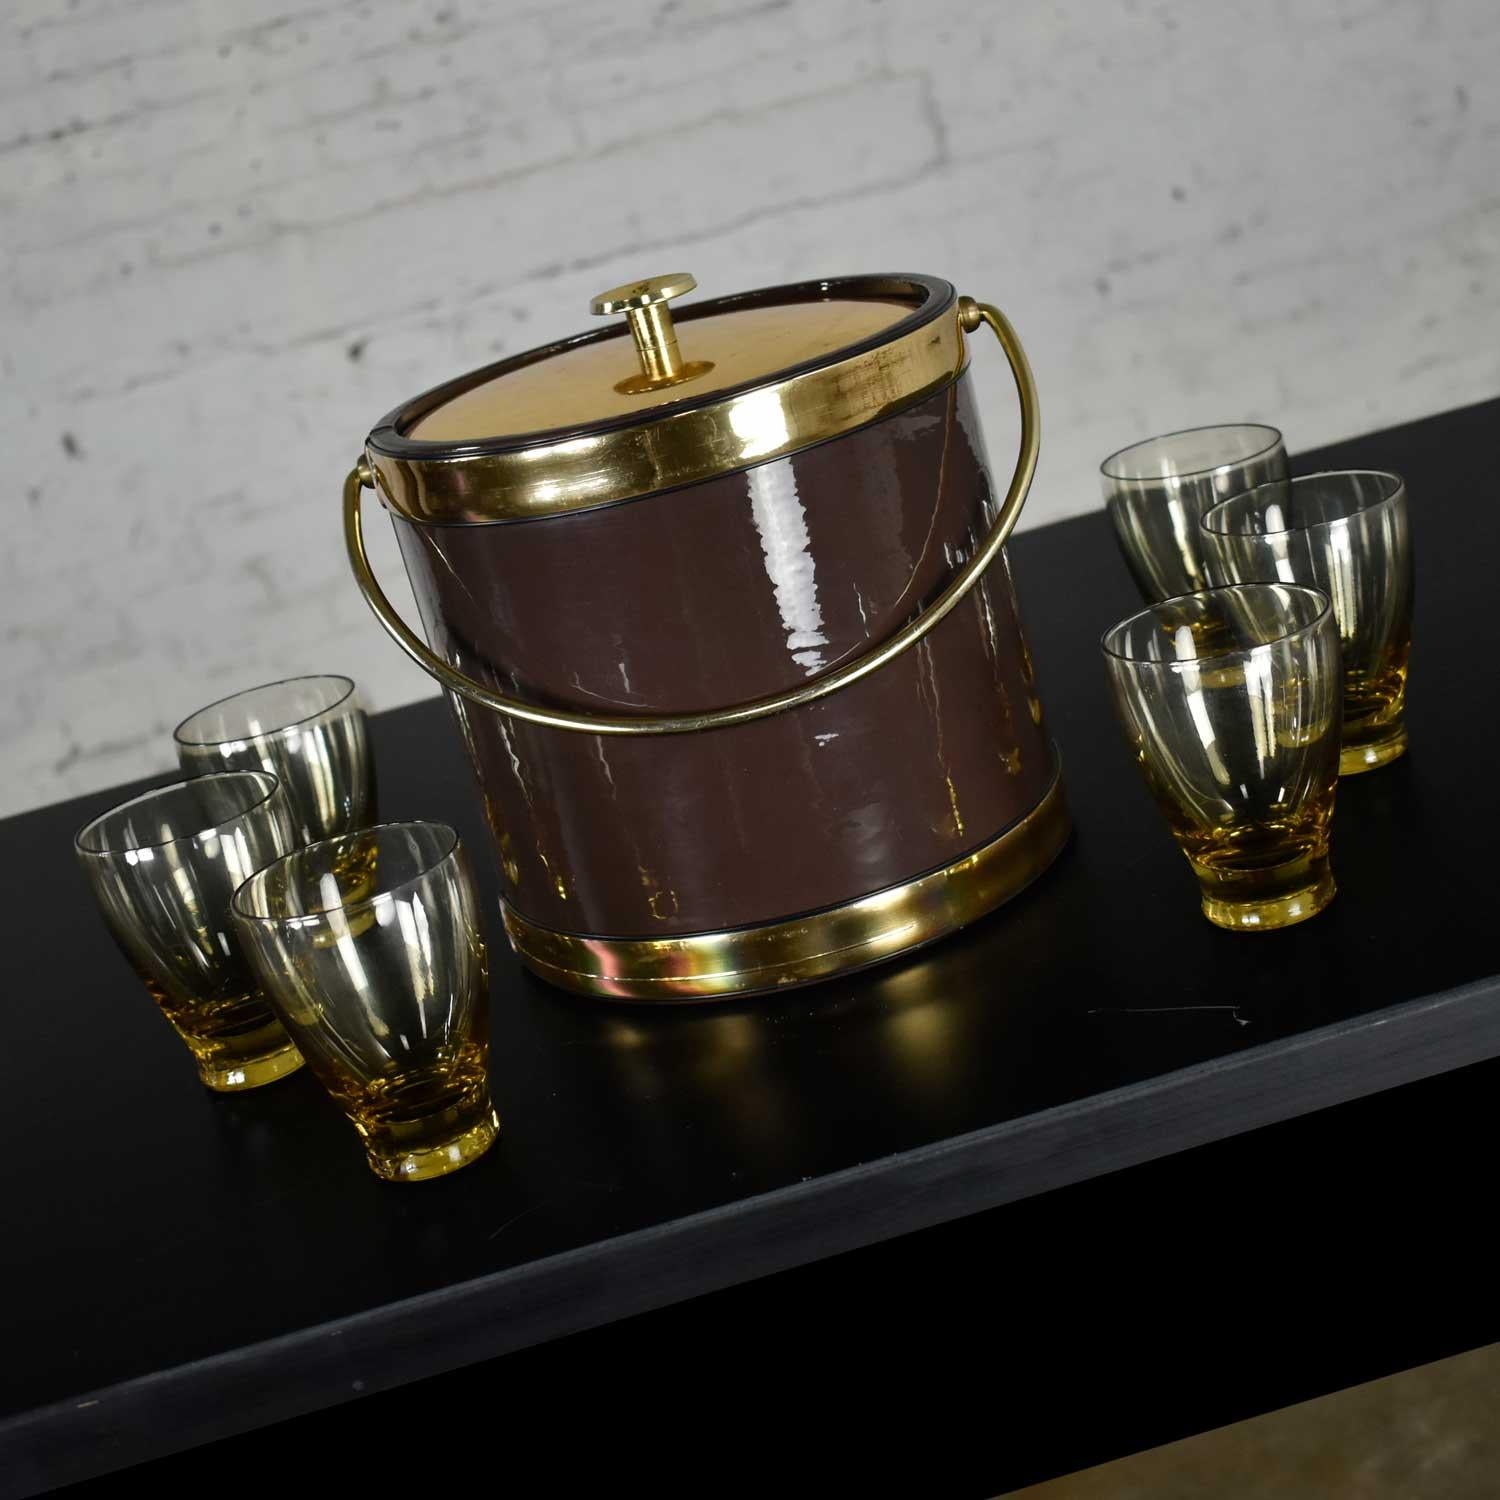 Awesome MCM Mid-Century Modern style set including a vintage brown vinyl ice bucket by Kraftware with gold detail and bail handle, brass plated lid, and knob, insulated plastic interior and six bar glasses in the style of Russel Wright. There are a